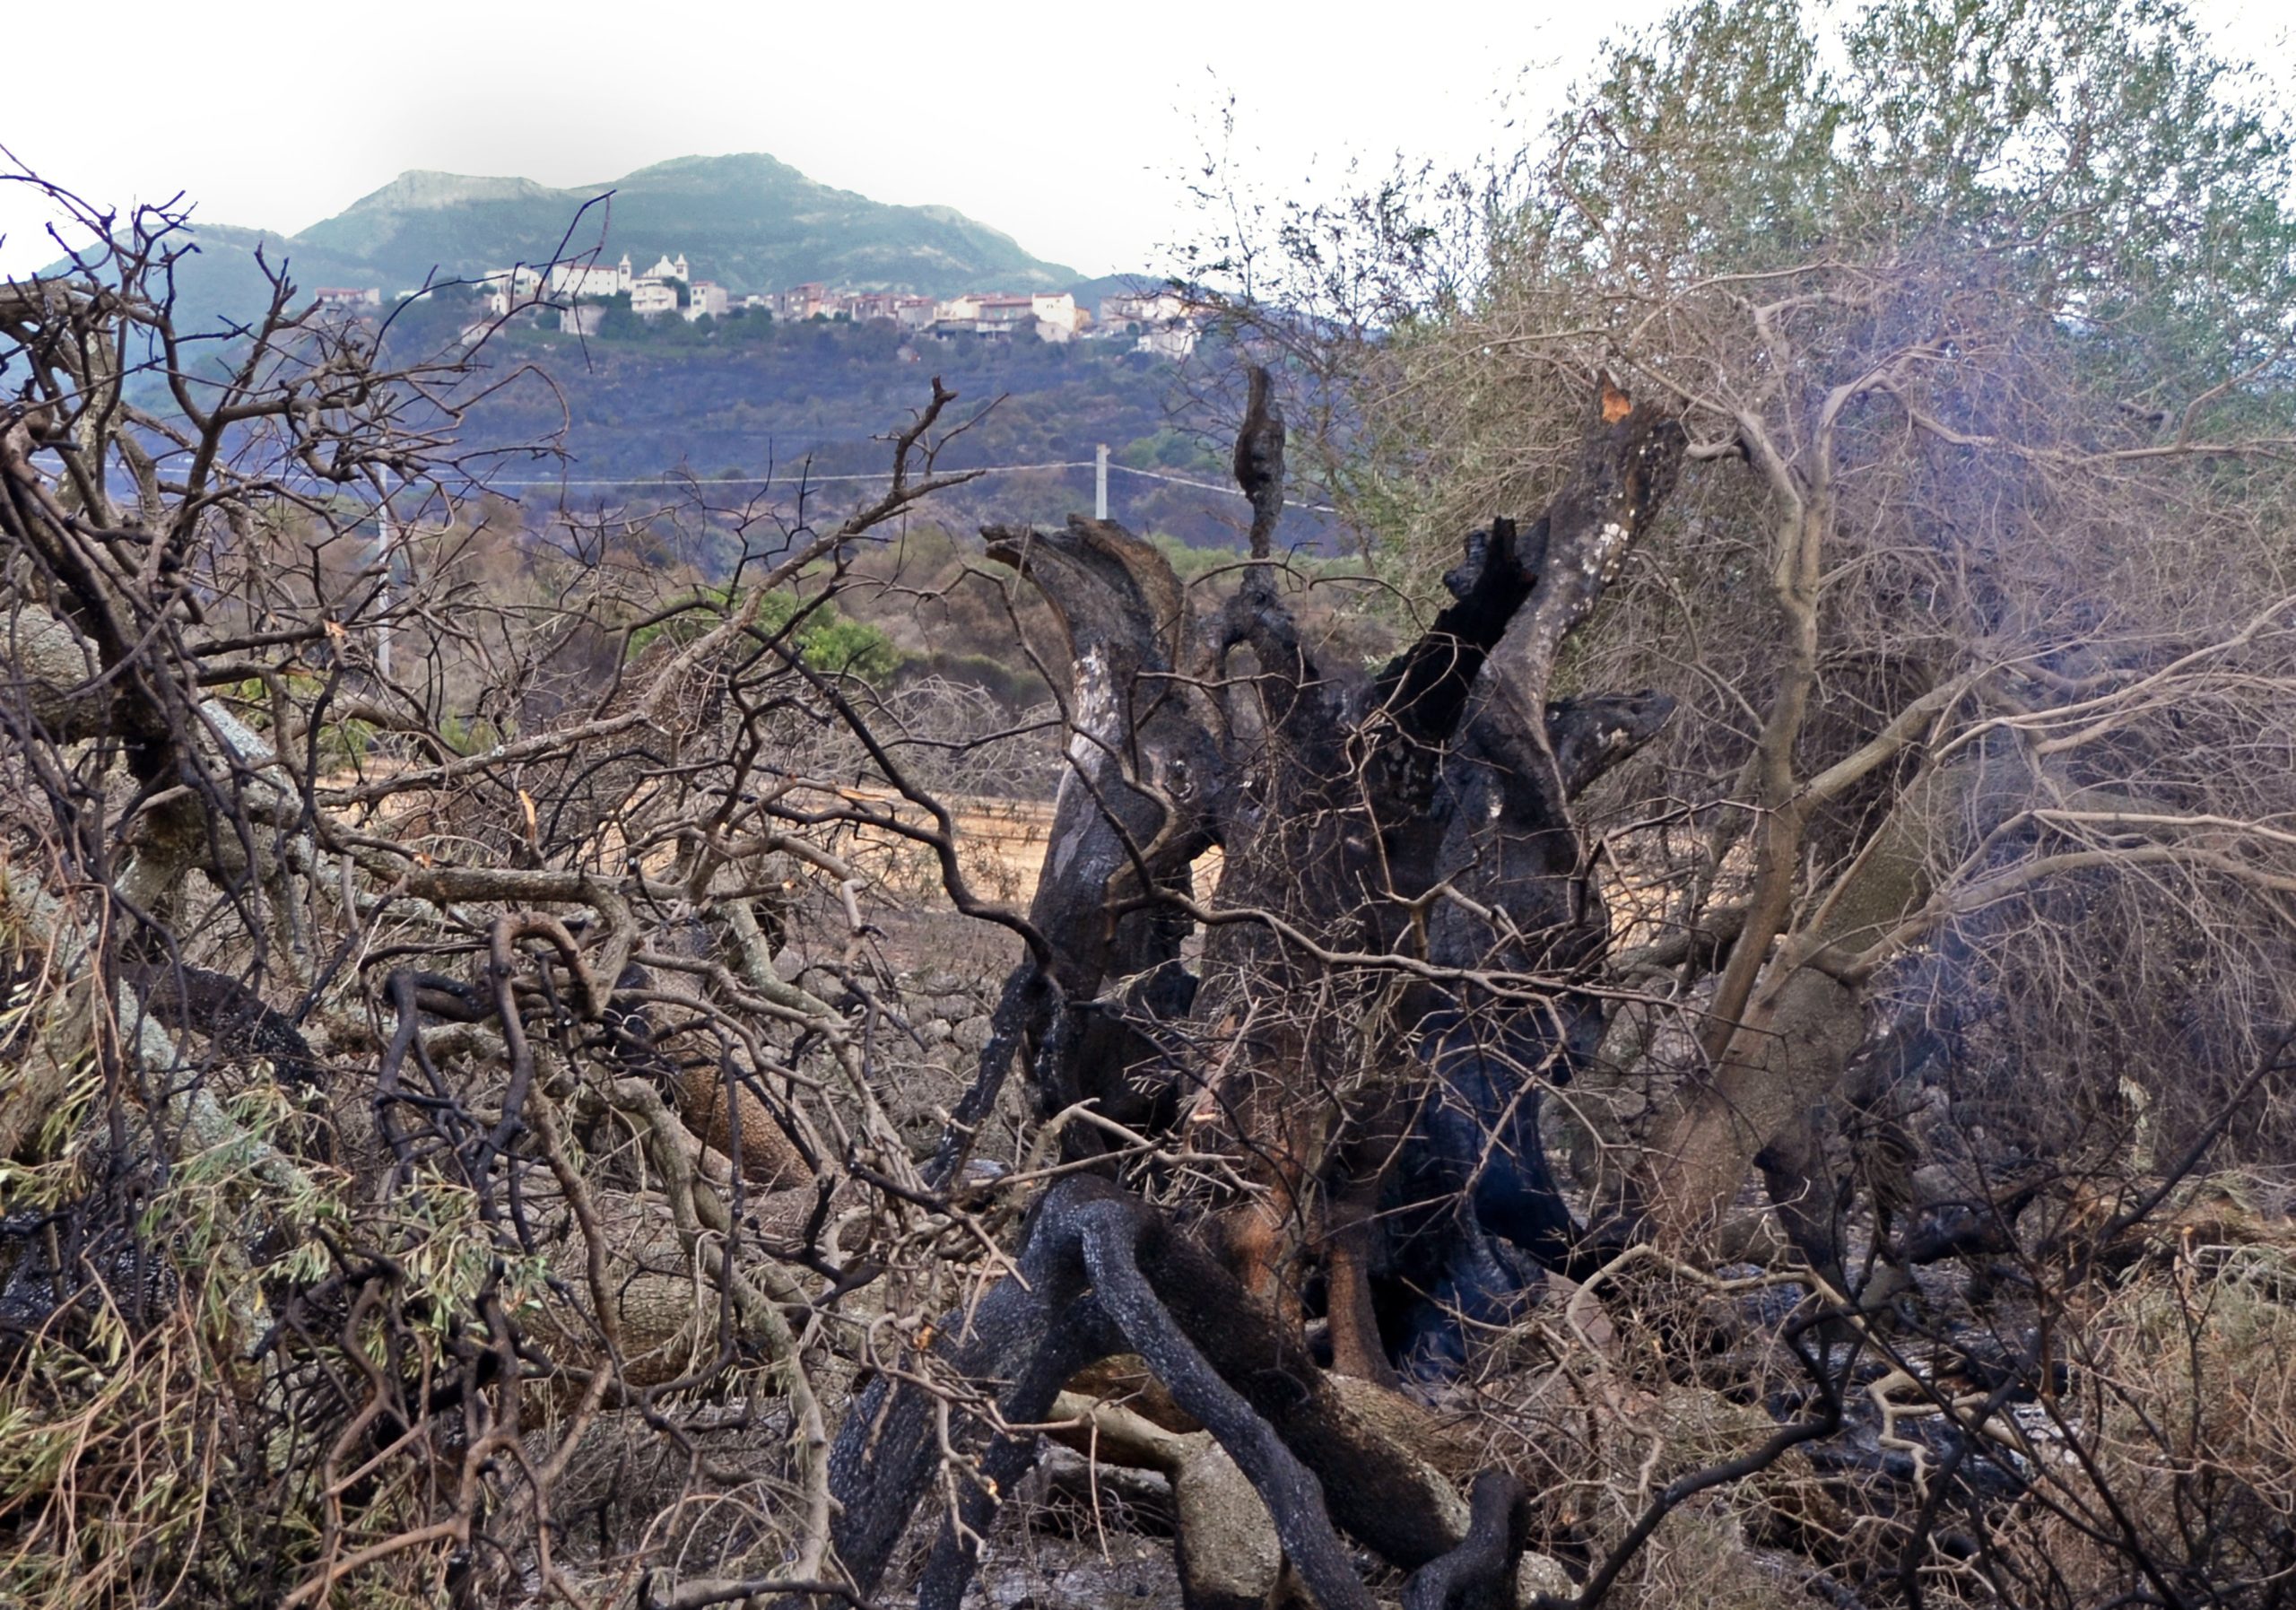 The remains of a 1,100-year-old olive tree near Cuglieri. (Photo: Valeria Murgia)